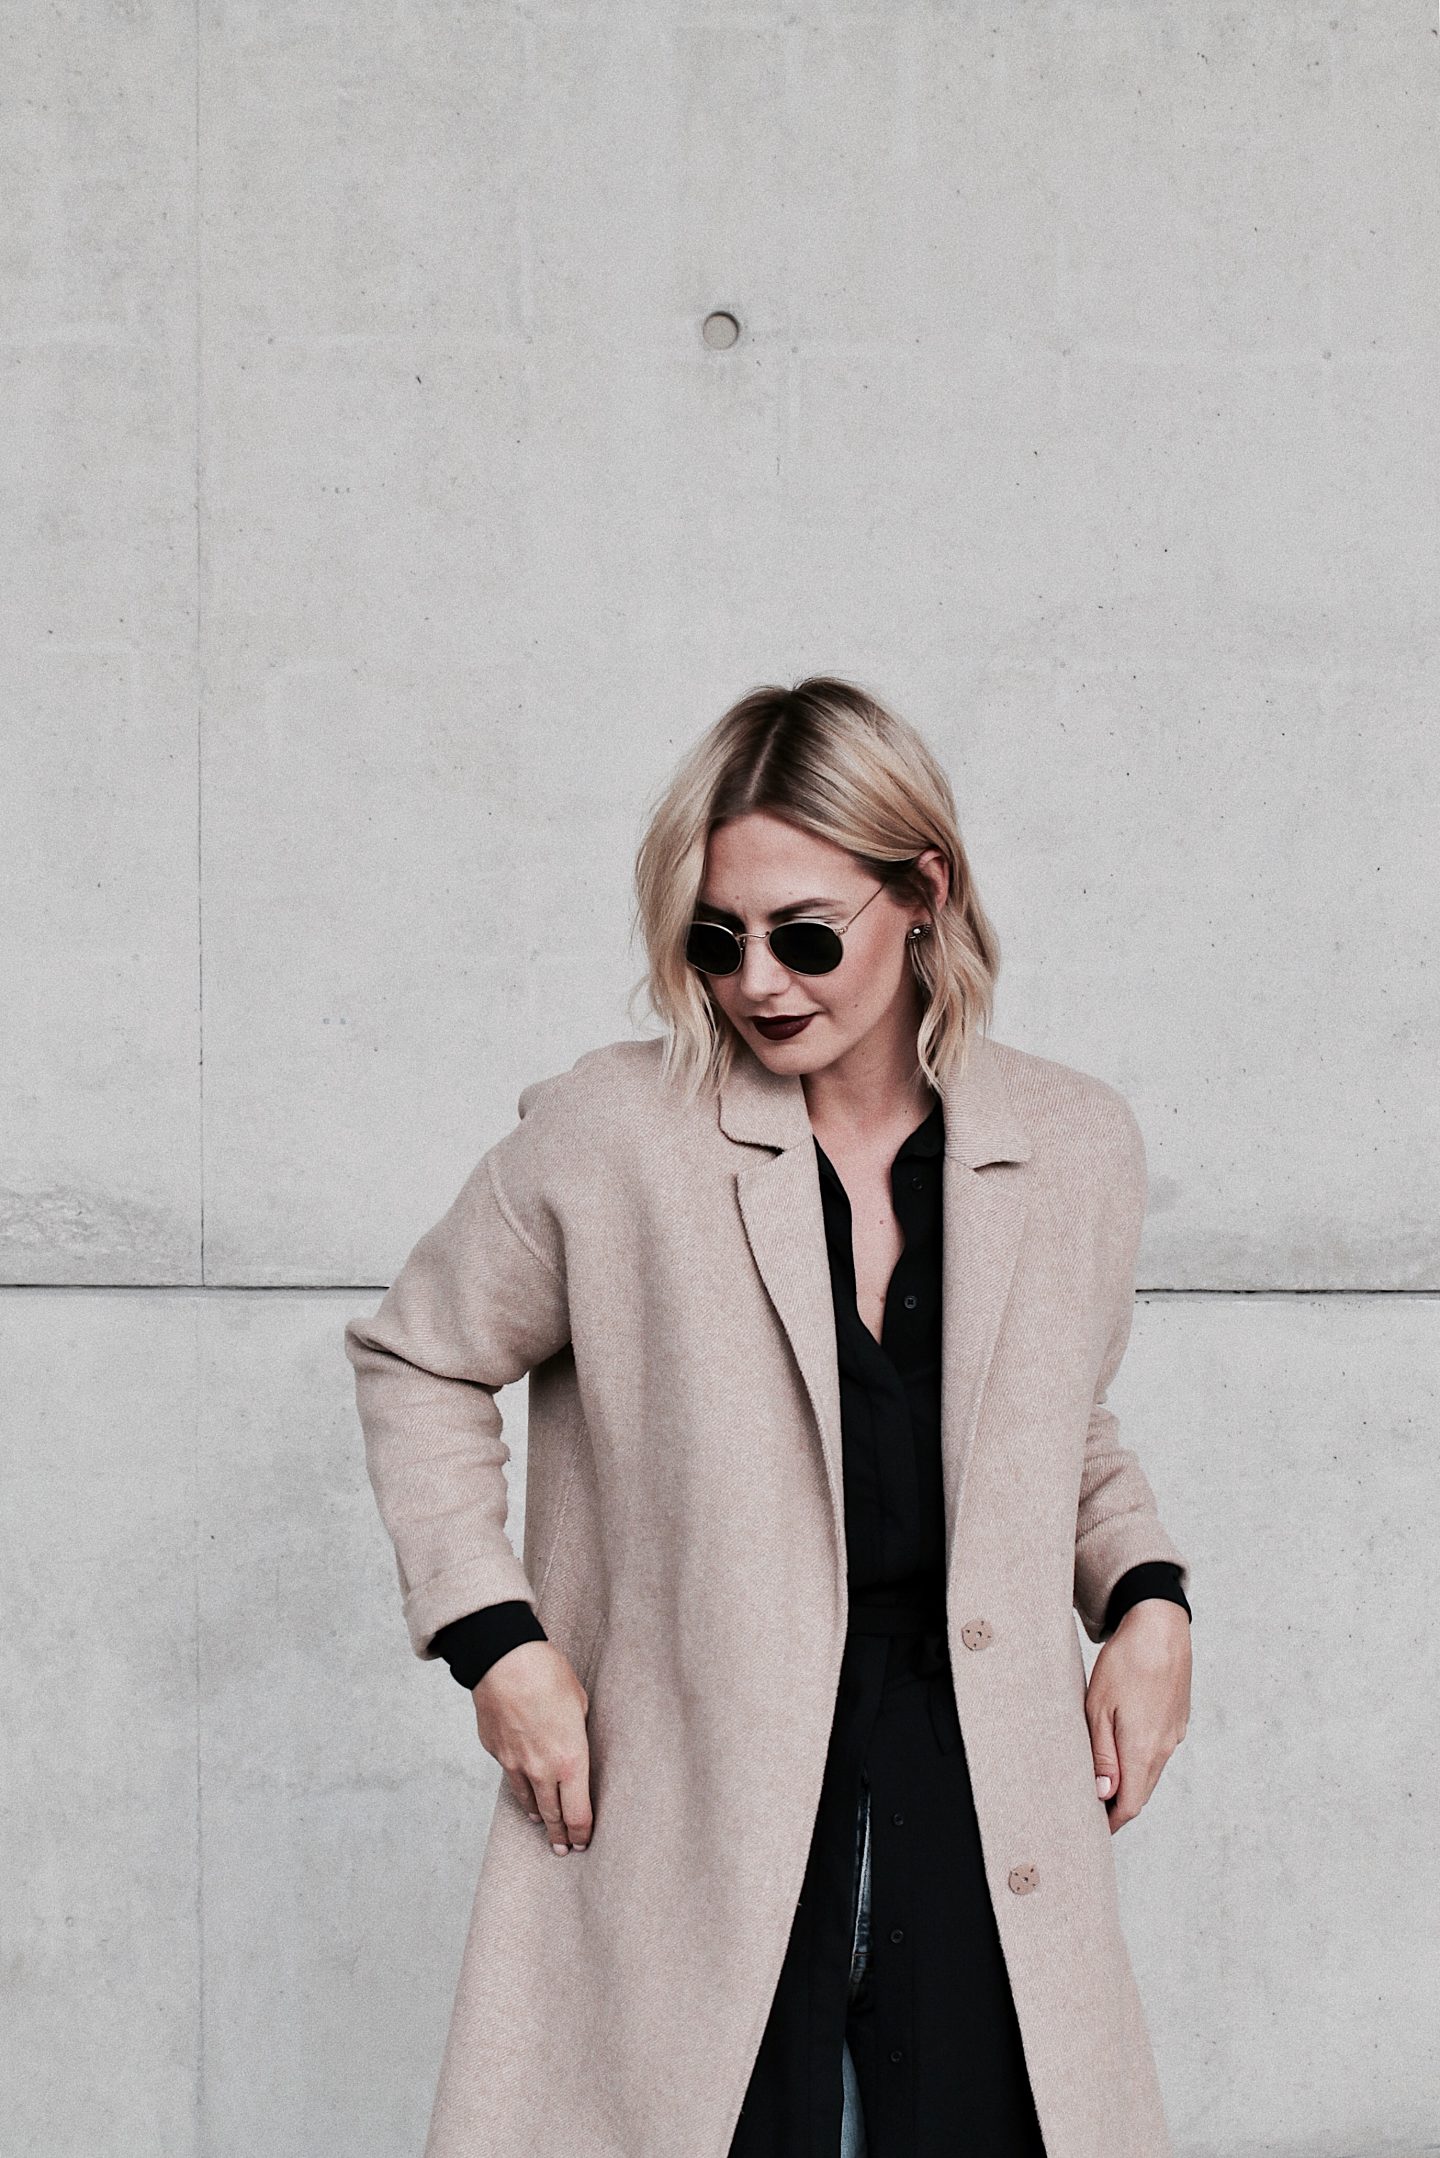 Steal Her Style: Autumn Ahead | The Daily Dose